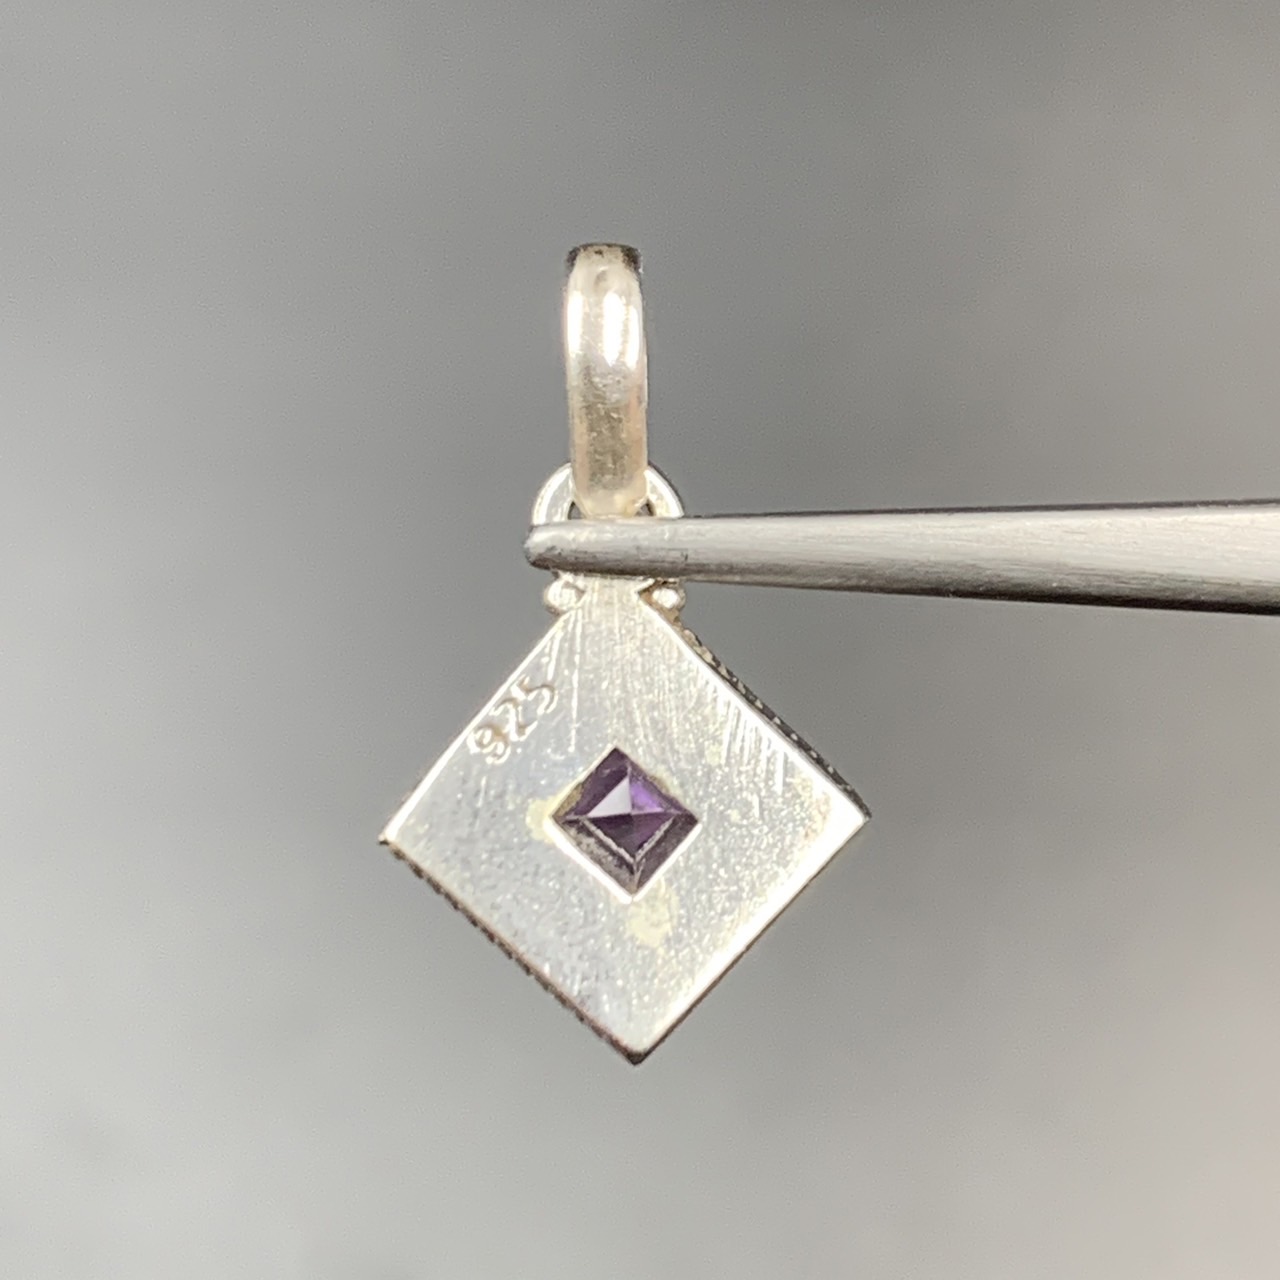 Natural Amethyst With Silver Pendant - Image 2 of 4